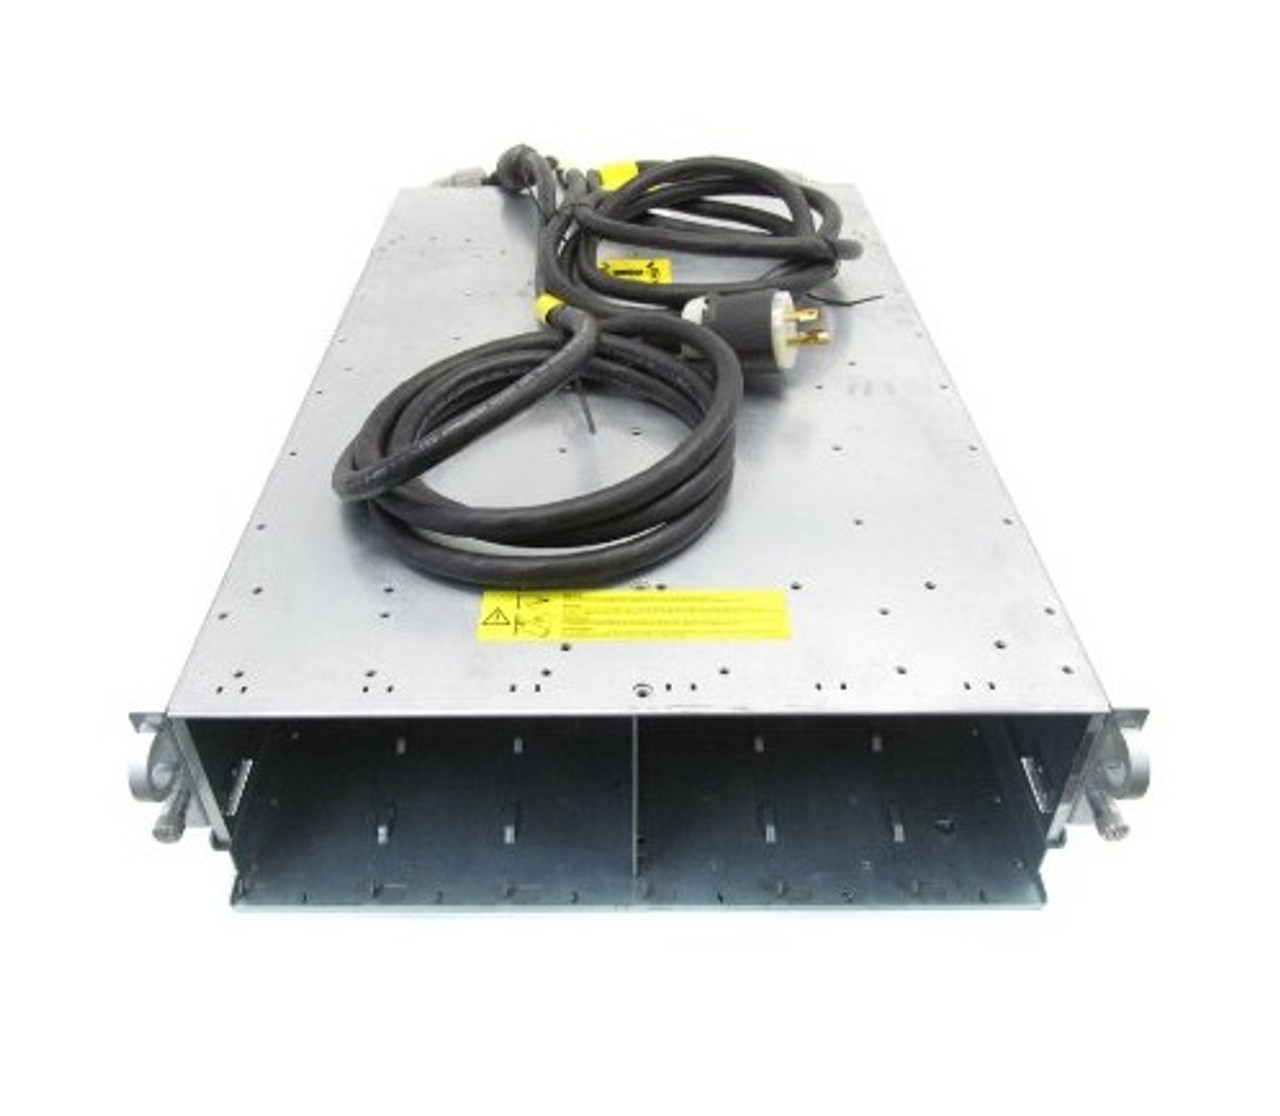 239162-001 - HP 3u Rack Mount Single Phase Power Enclosure With 4 Hot Plug Power Supplies for ProLiant BL P-class